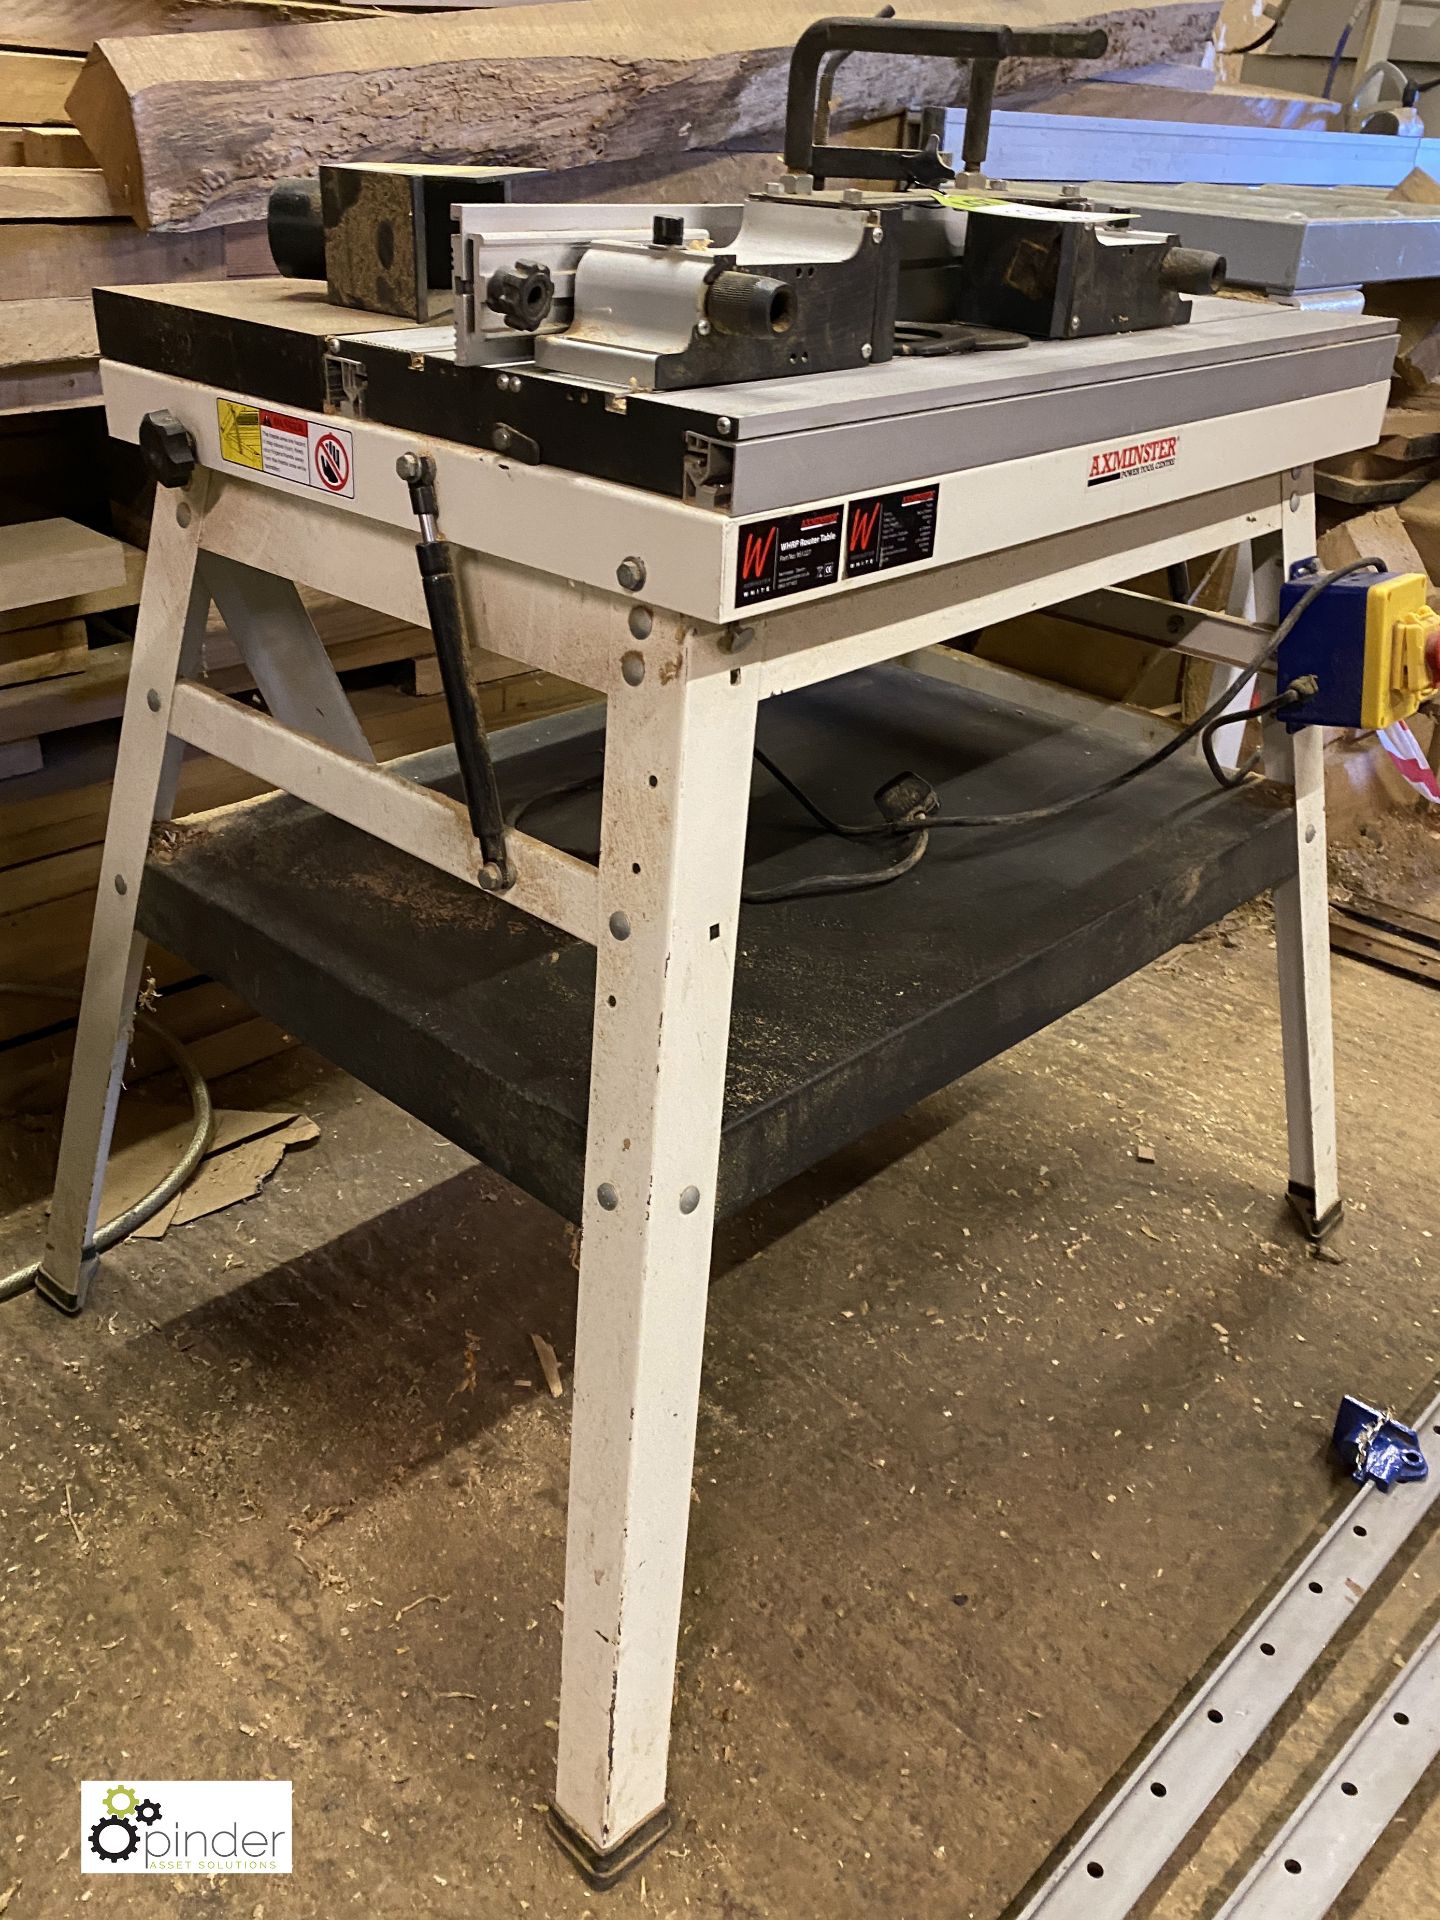 Axminster WHRP Router Table, 780mm x 560mm x 870mm, no router (LOCATION: Harbury) - Image 5 of 6